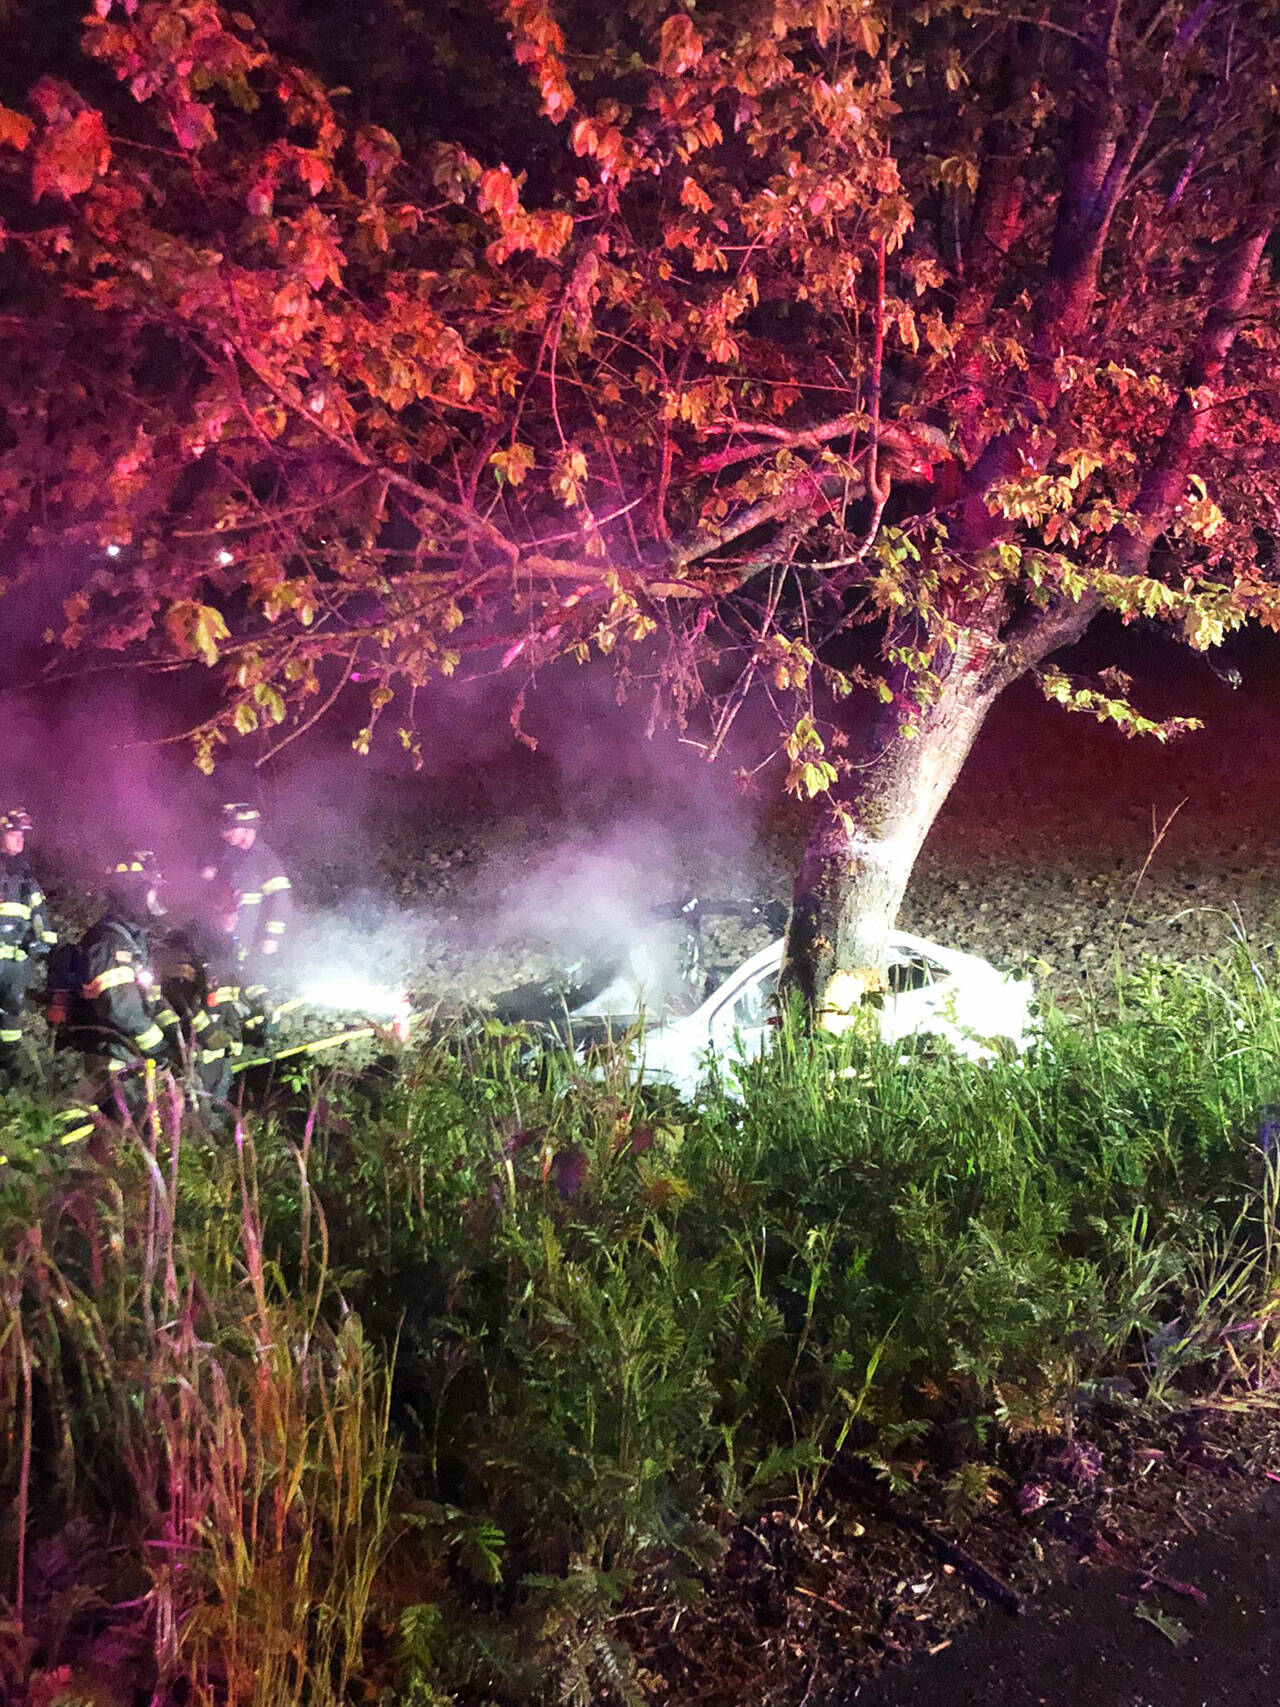 A man was killed when a car went off the road and crashed into a tree at about 3:19 a.m. Thursday, May 12 on the East Valley Highway near South 277th Street. COURTESY PHOTO, Puget Sound Fire